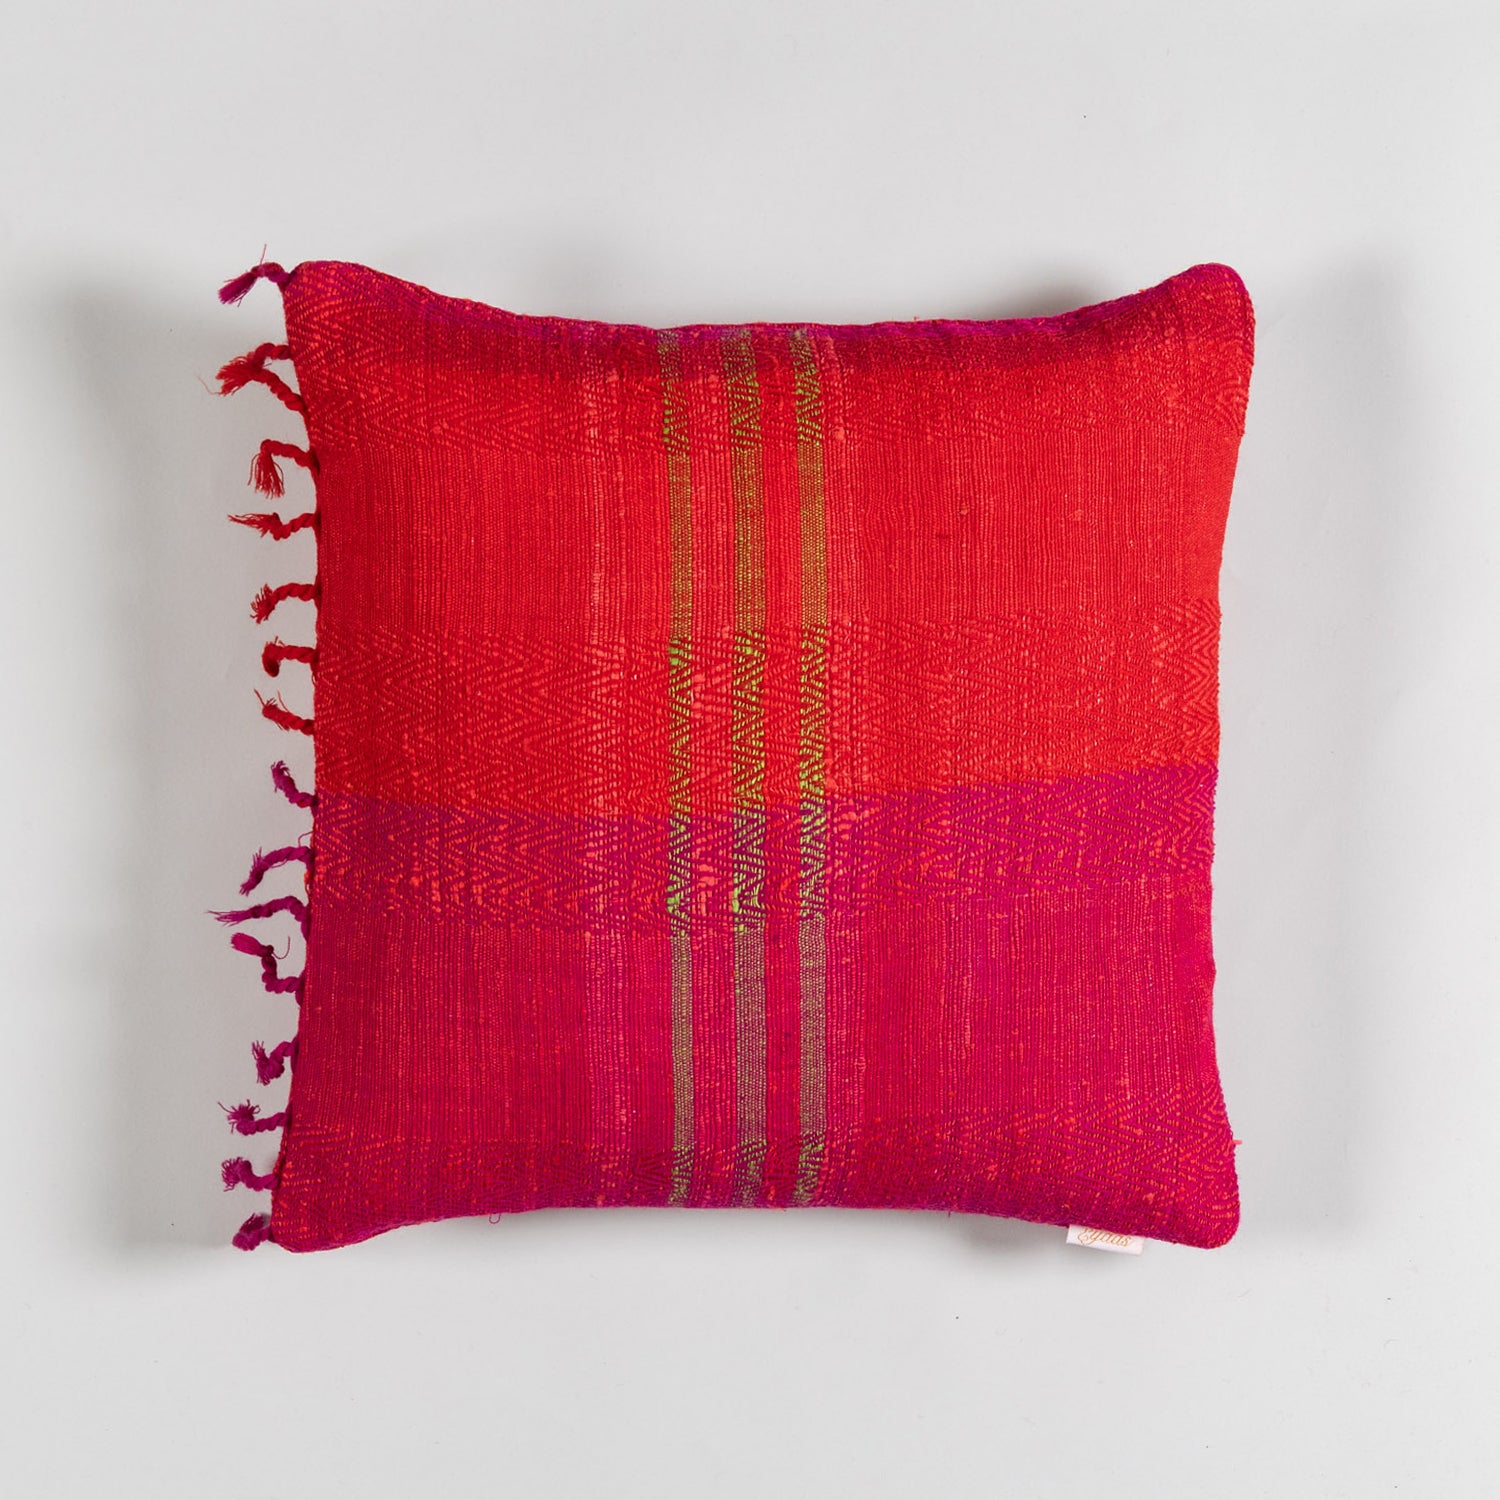 Handwoven Upcycled Red & Pink Wool & Oak Silk Cushion Cover - 16x16